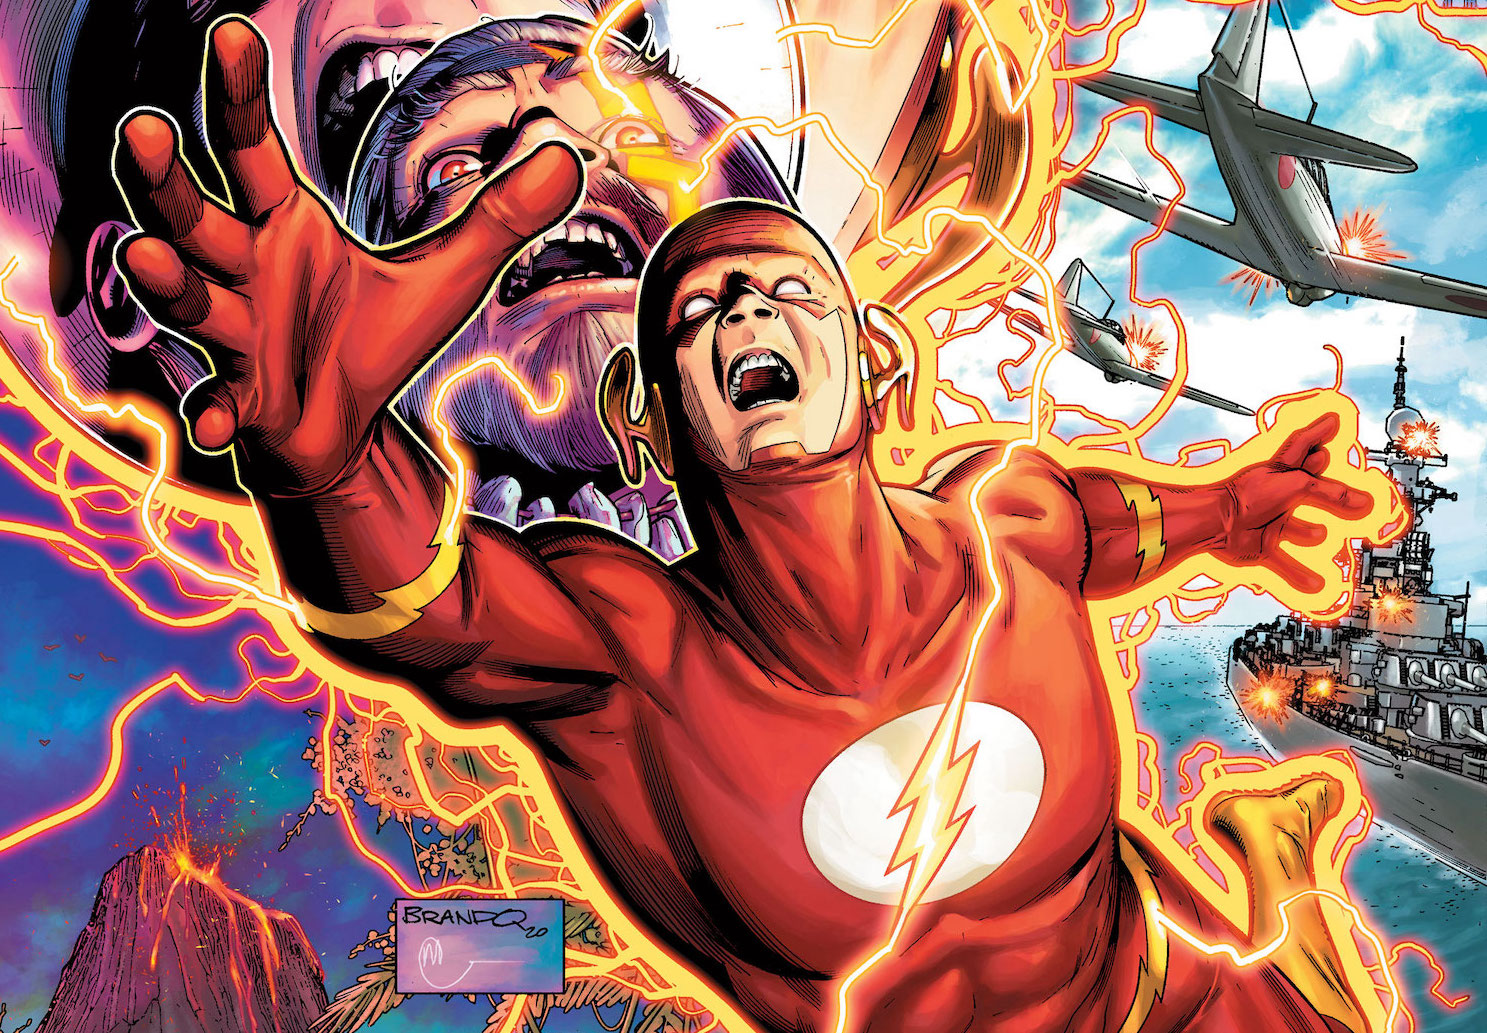 Writer Jeremy Adams and artist Brandon Peterson take over 'The Flash' in March 2021